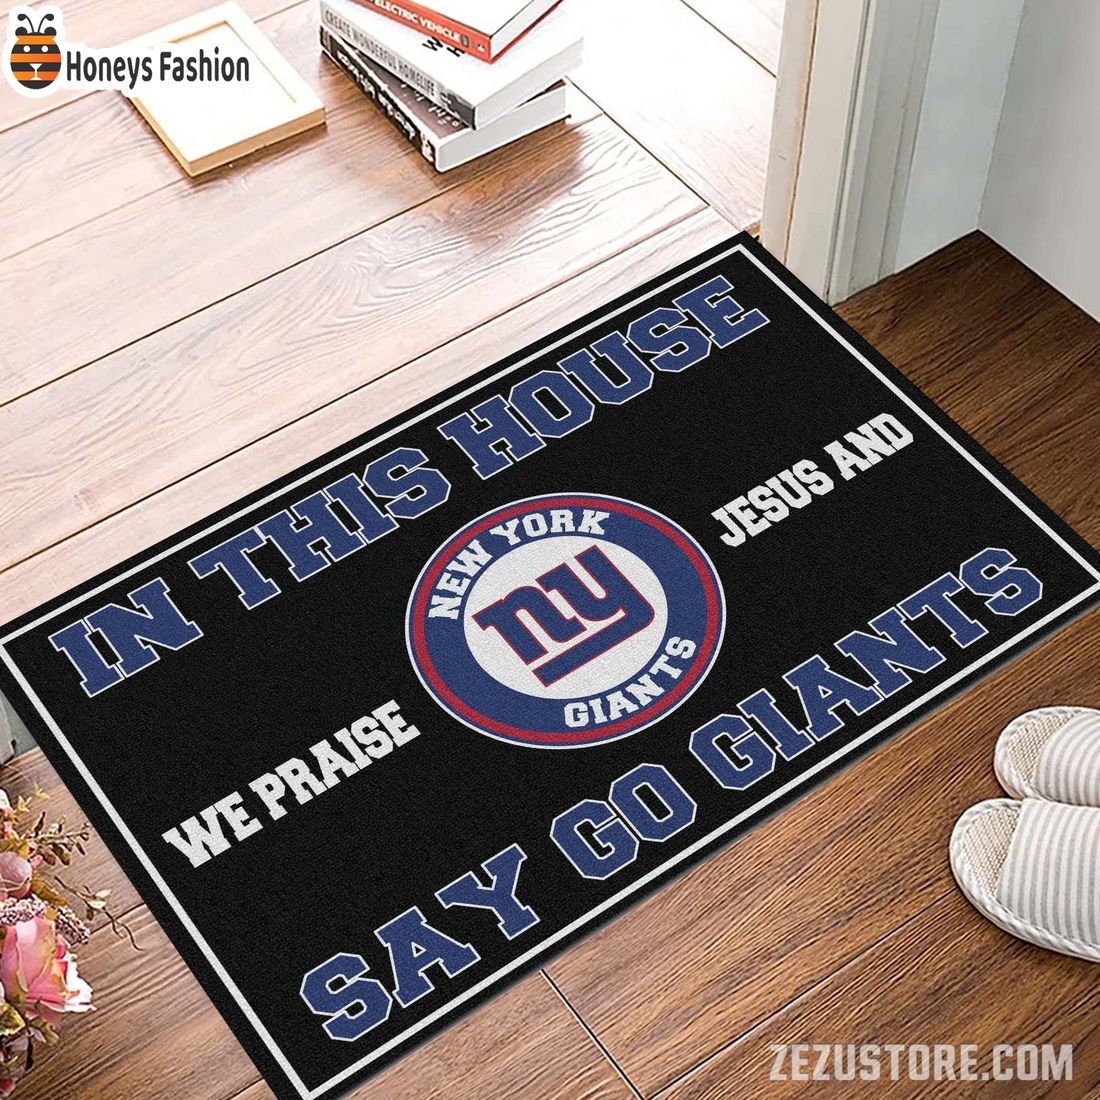 In this house we praise jesus and say go Giants doormat